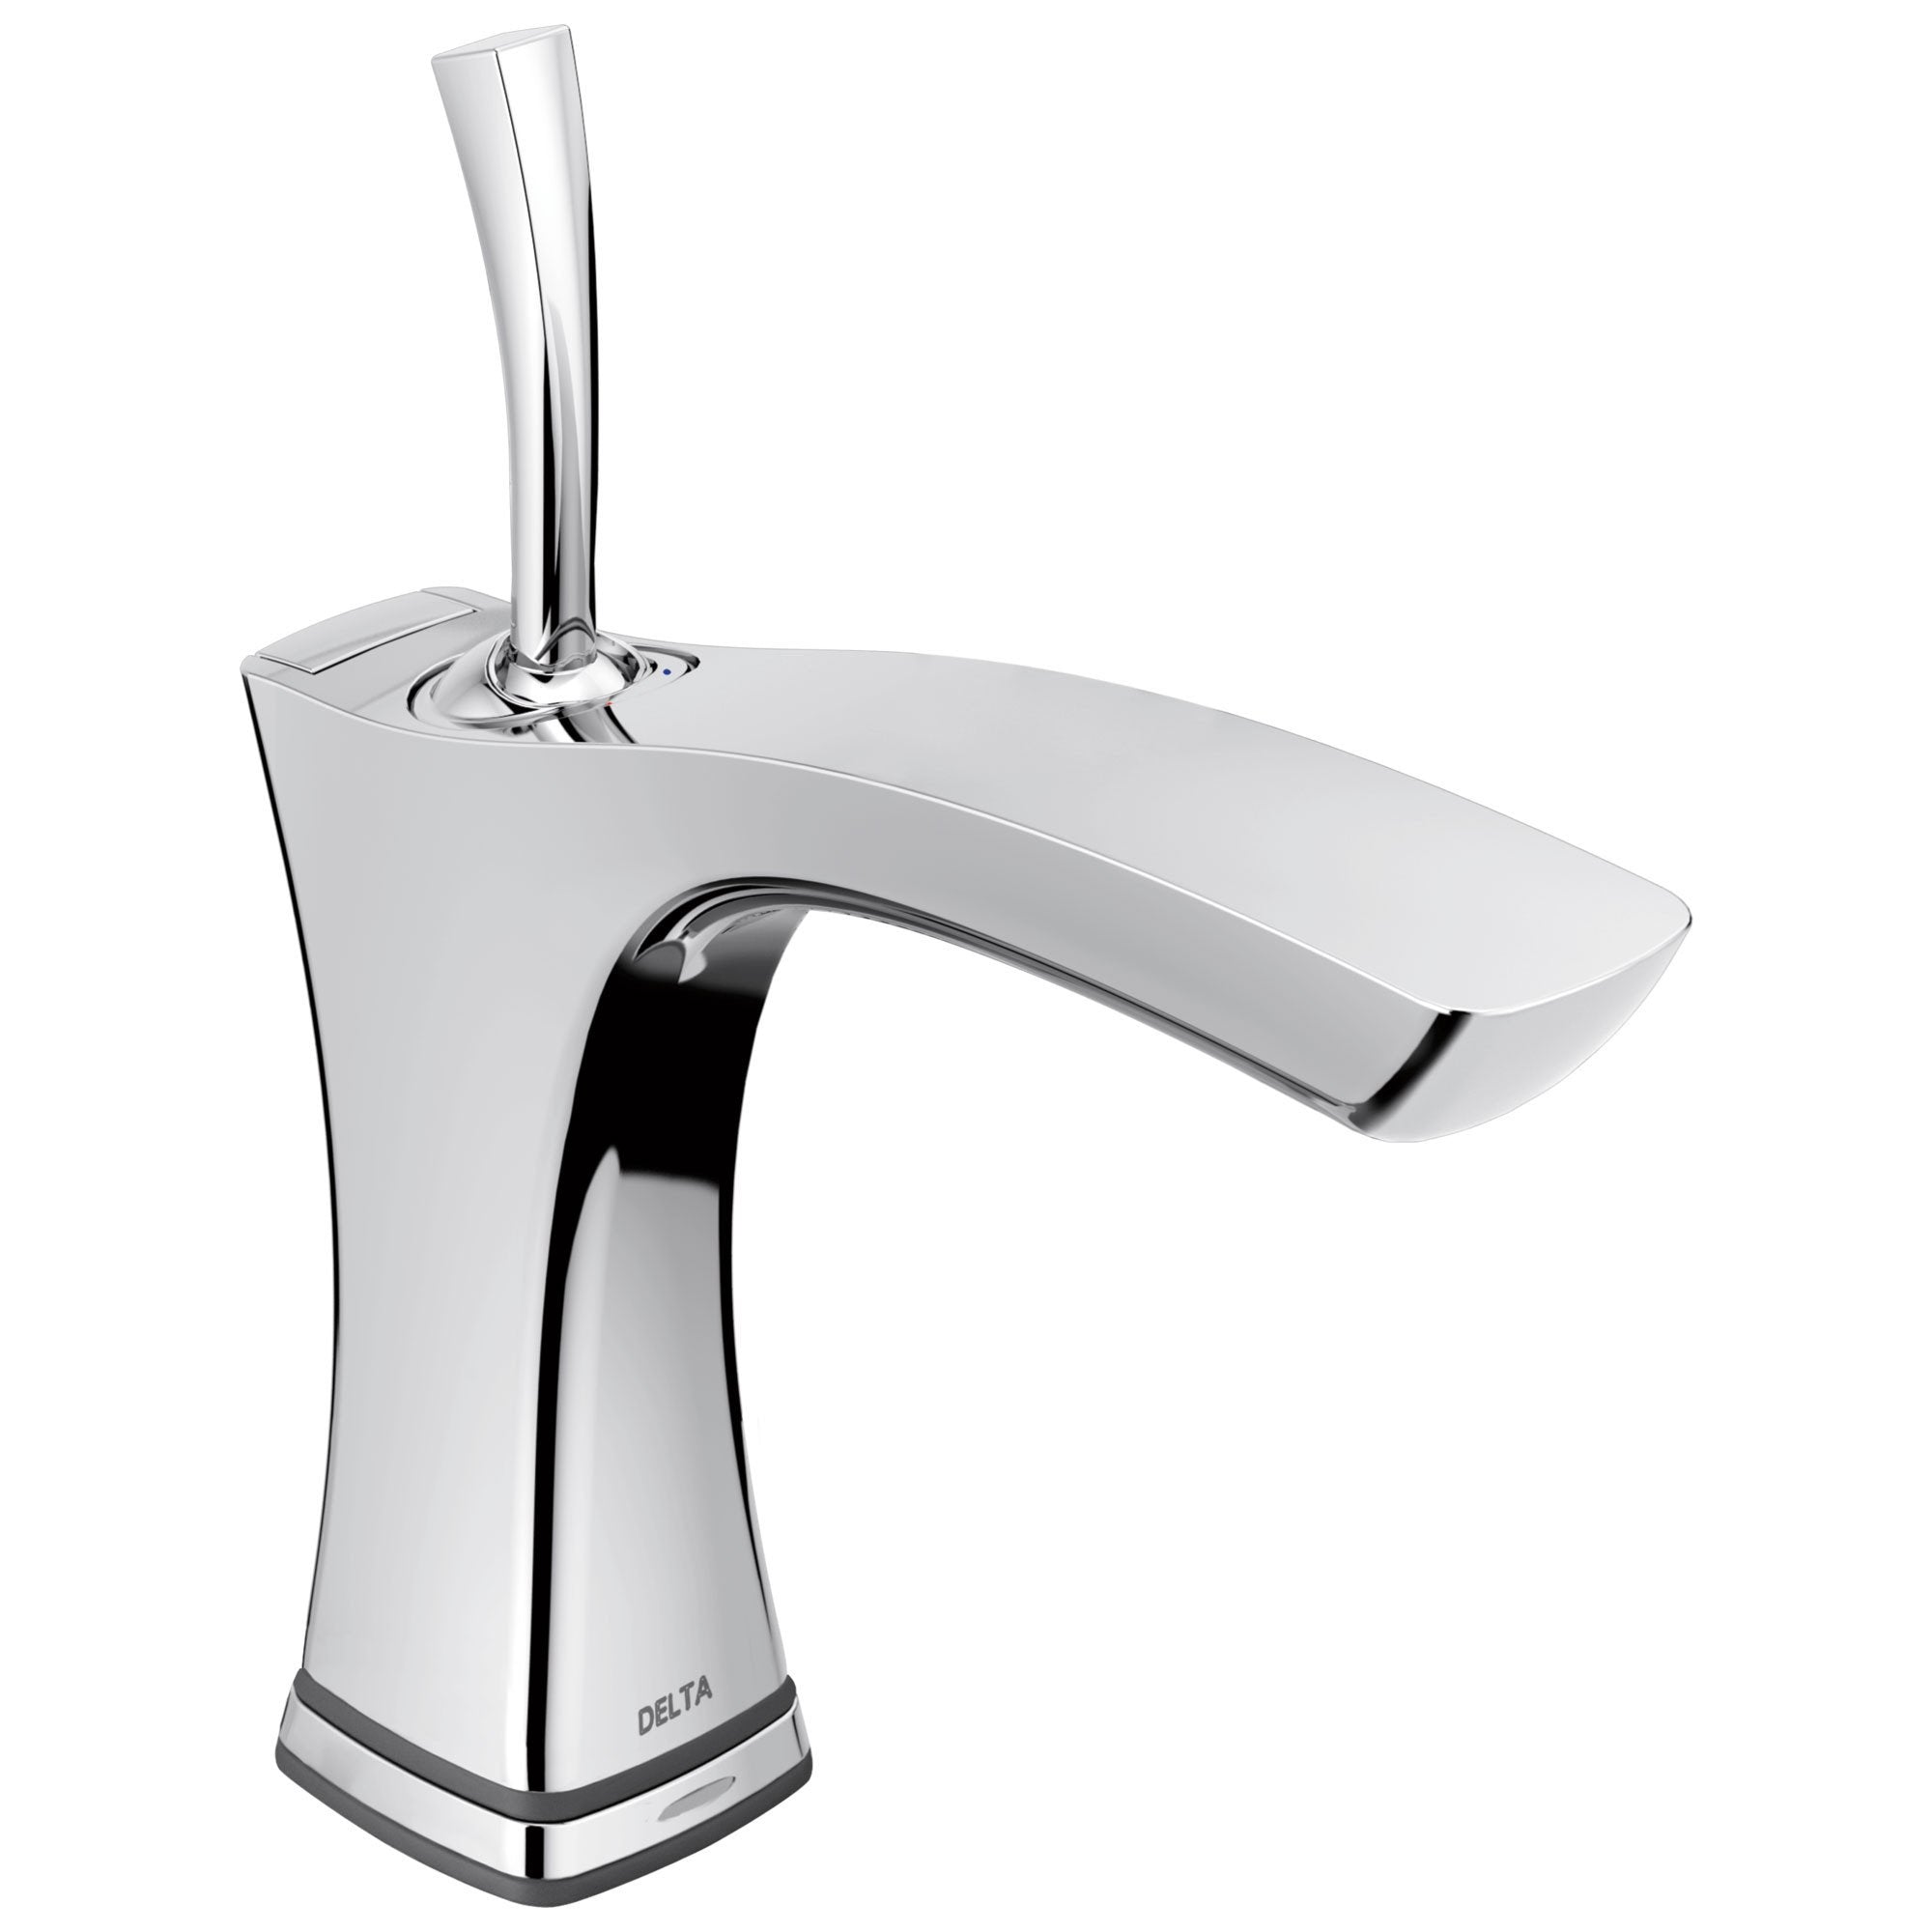 Delta Tesla Collection Chrome Finish Modern Sculpted Single Handle Electronic Bathroom Sink Faucet with Touch2Oxt Technology 714300